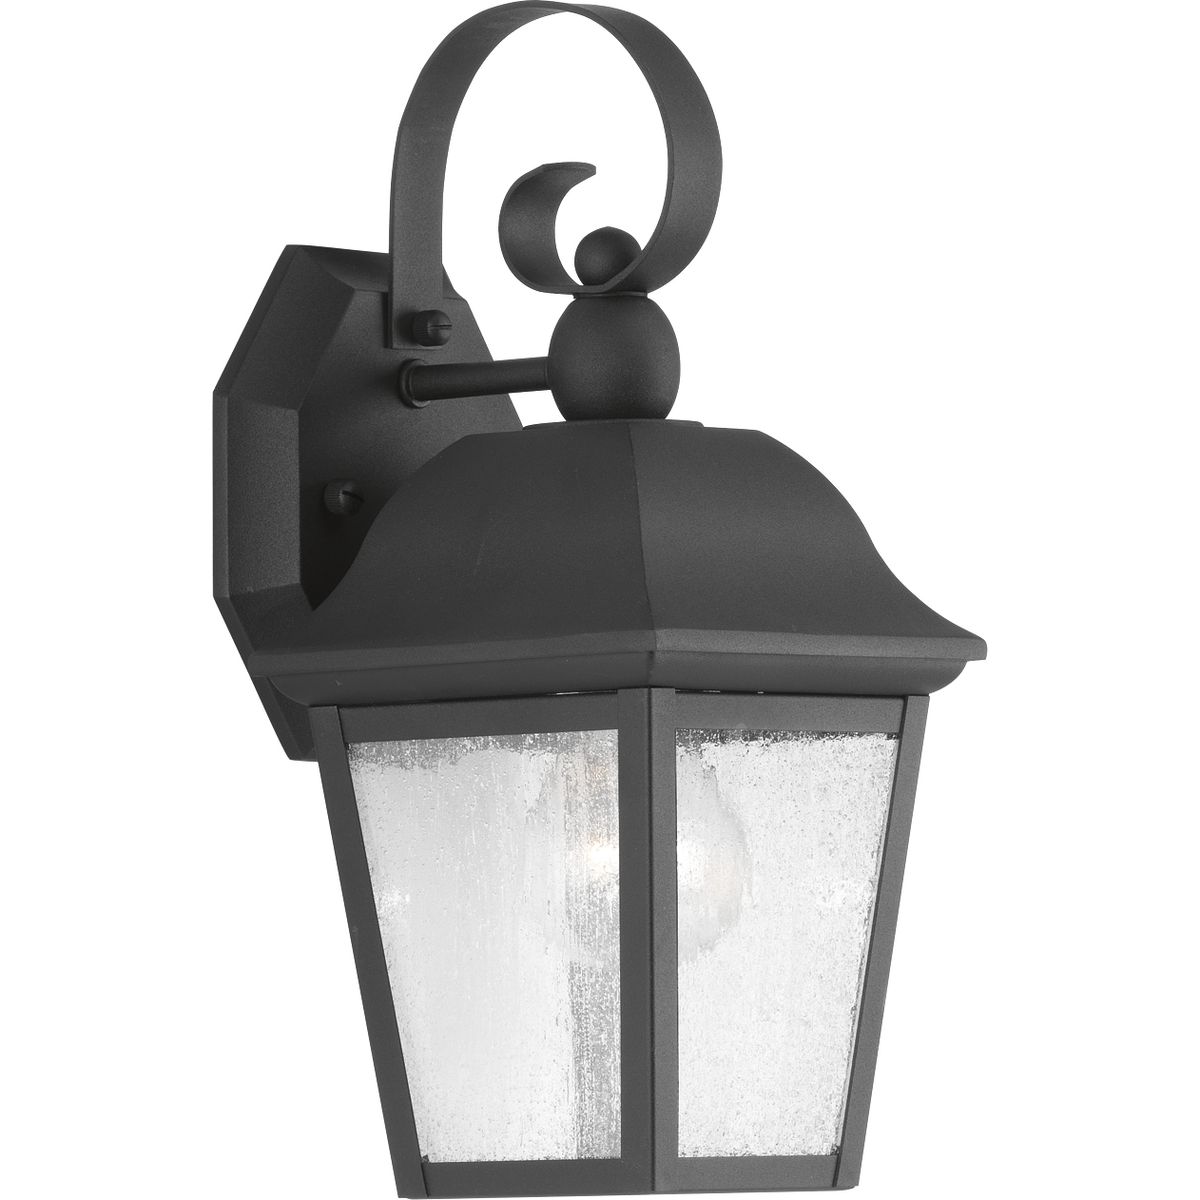 Enjoy the updated classic styling for a variety of outdoor applications in the Kiawah collection. The one-light wall lantern features seeded glass panels and traditional detailing combine to create a soft and updated lantern design. The lantern is open on bottom to easily access the lamp.